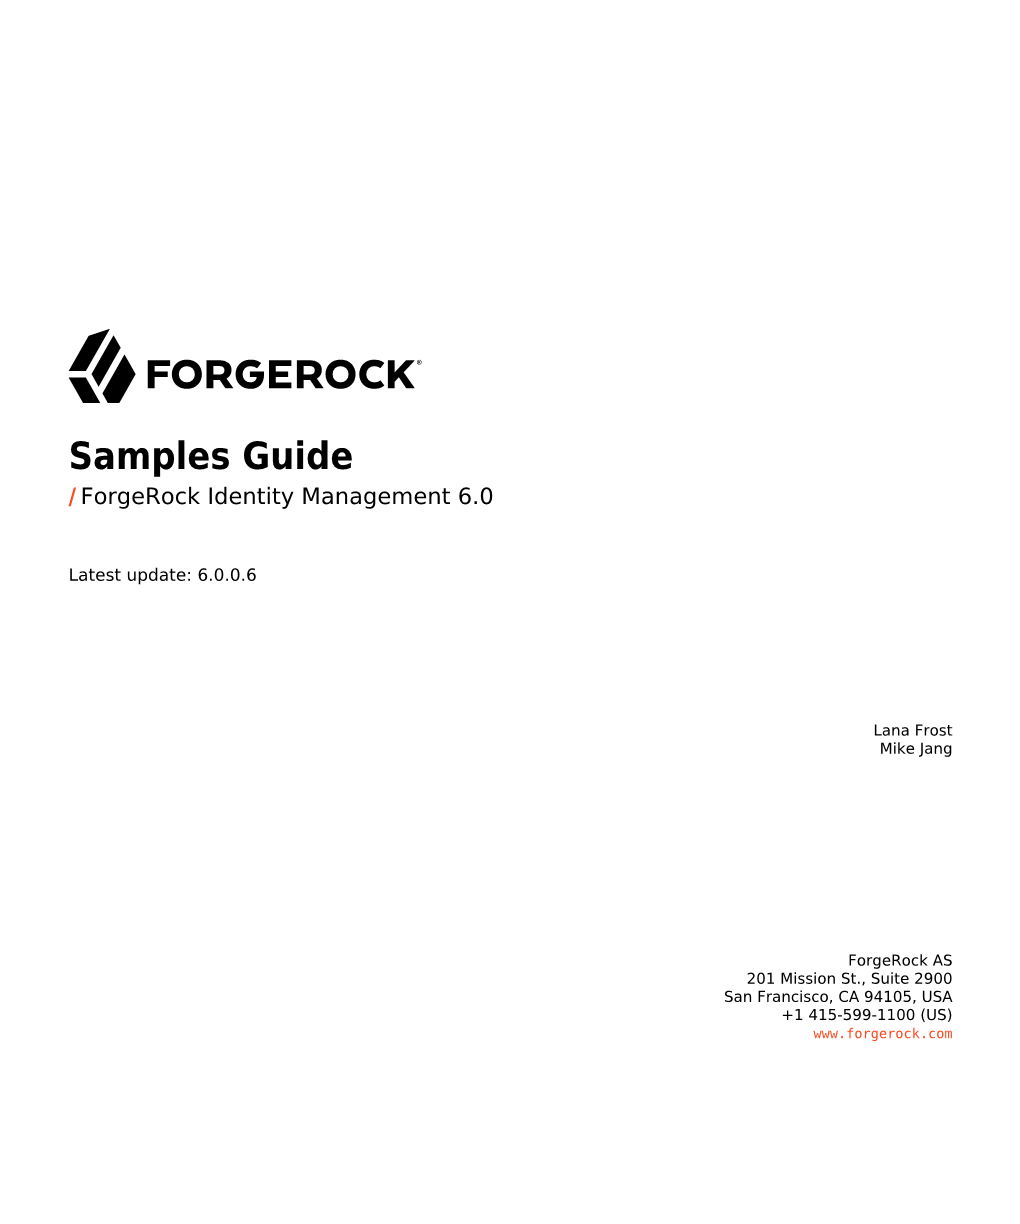 Samples Guide / Forgerock Identity Management 6.0